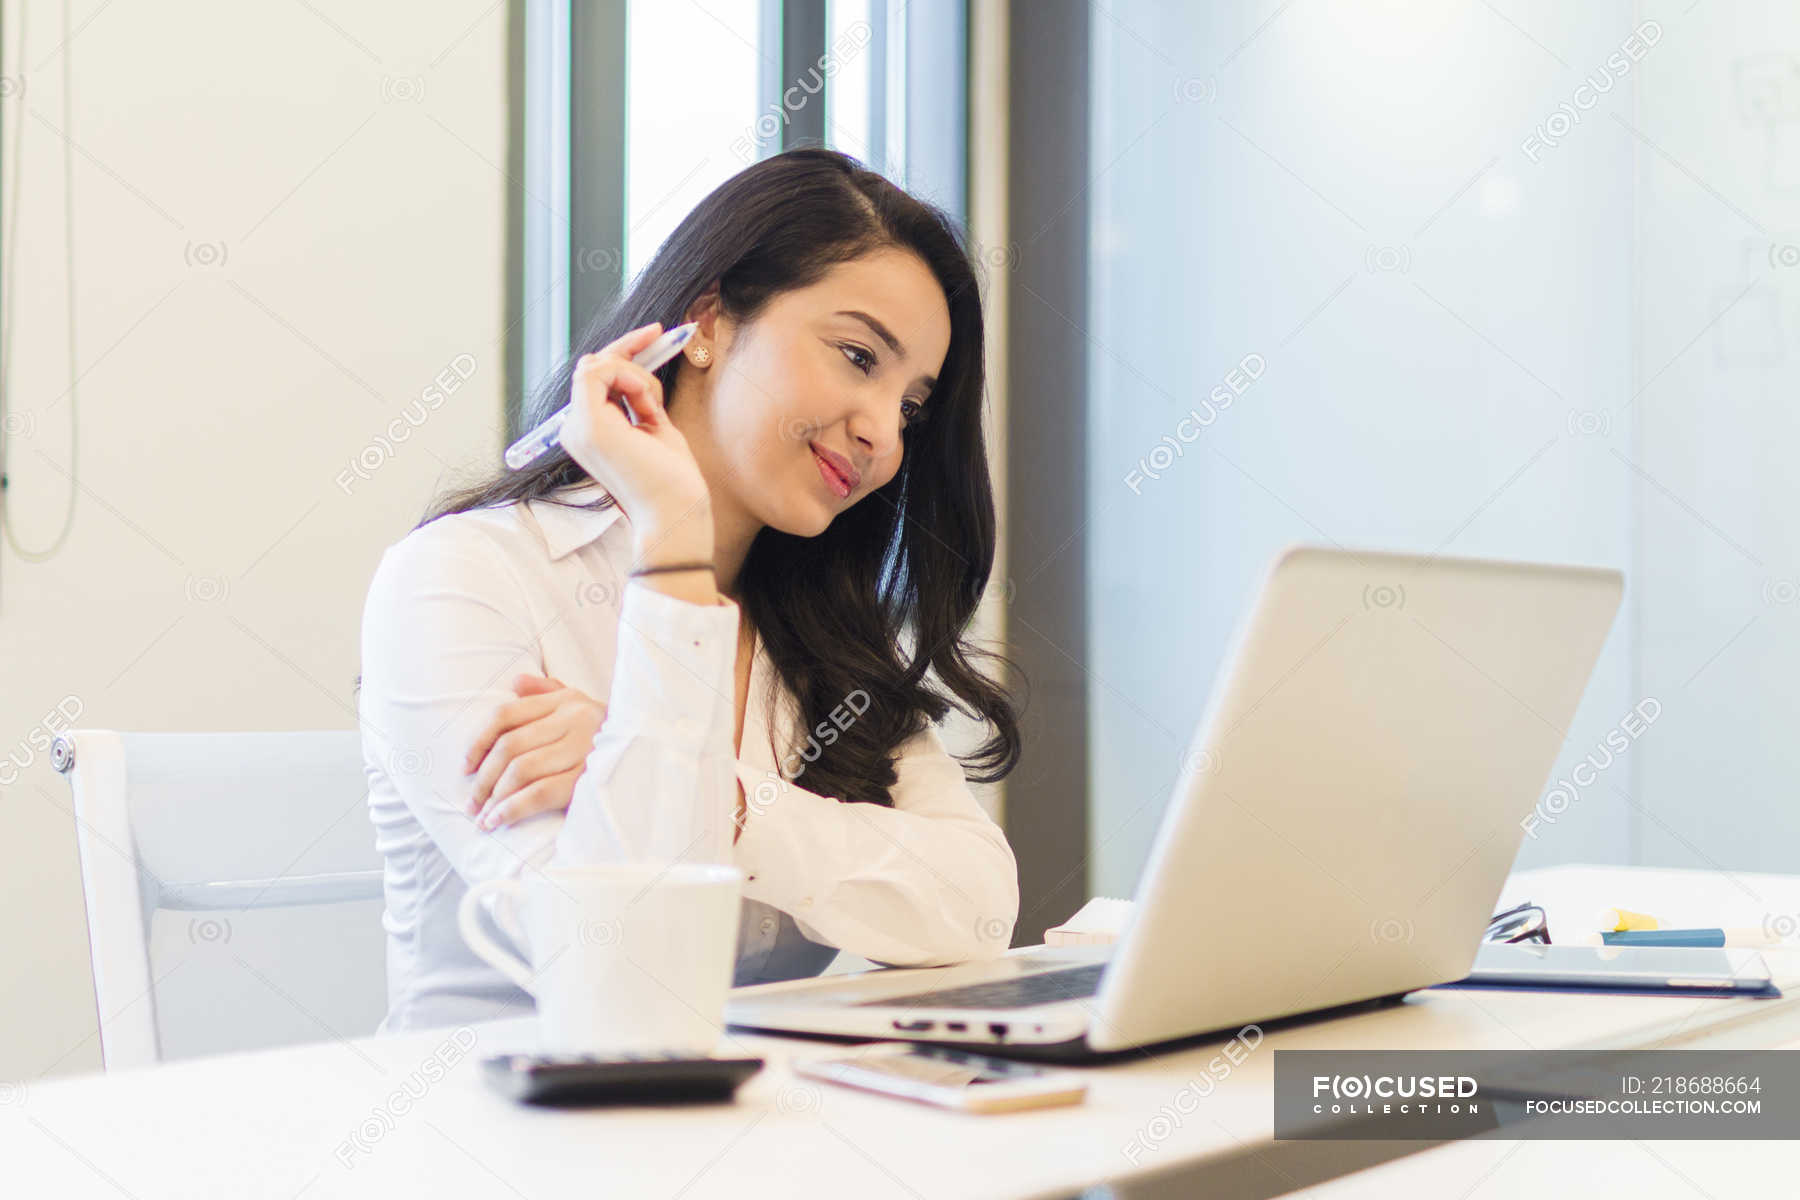 Young Woman Working In Modern Office — girl, brainstorm - Stock Photo |  #218688664